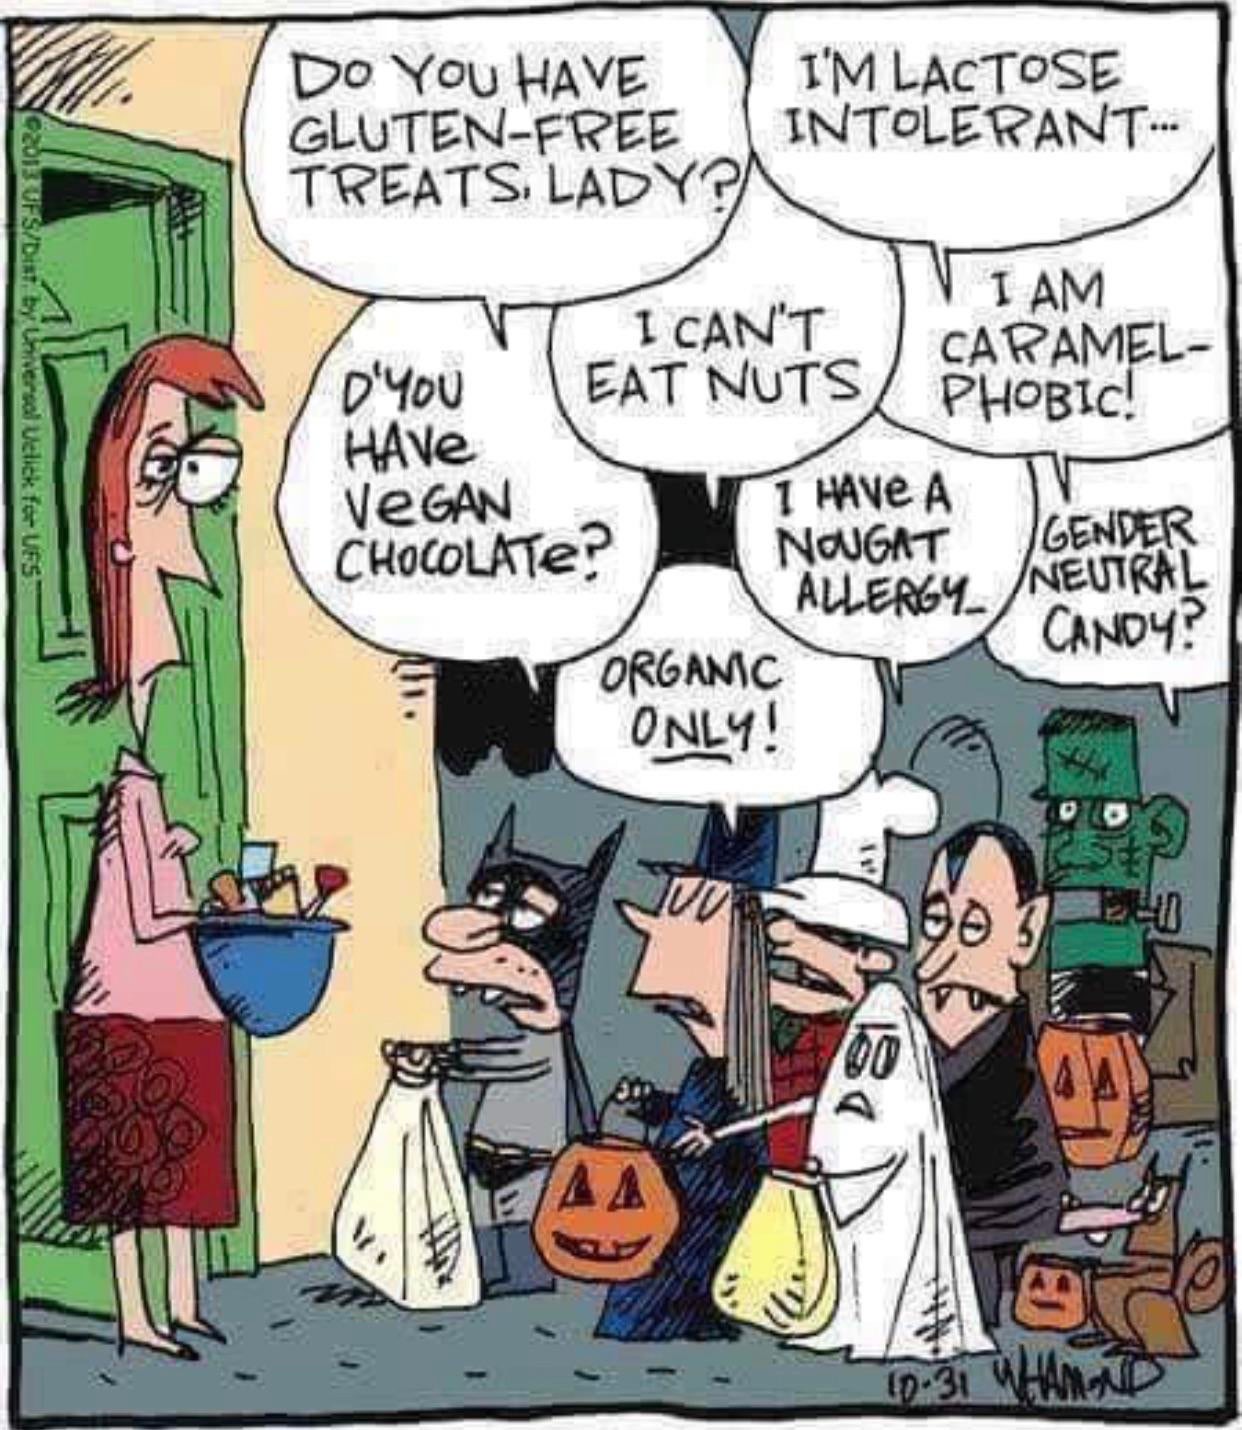 halloween allergy - 2013 UfsDit by Universal Velick for Us! Do You Have I'M Lactose GlutenFree Intolerant... Treats, Lady Viam Tt I Can'T Caramel D'You Eat Nuts Phobic! Have VeGAN I Have A Chocolate? Nougat Gender Candy? Organic Only! Allergy Neutral